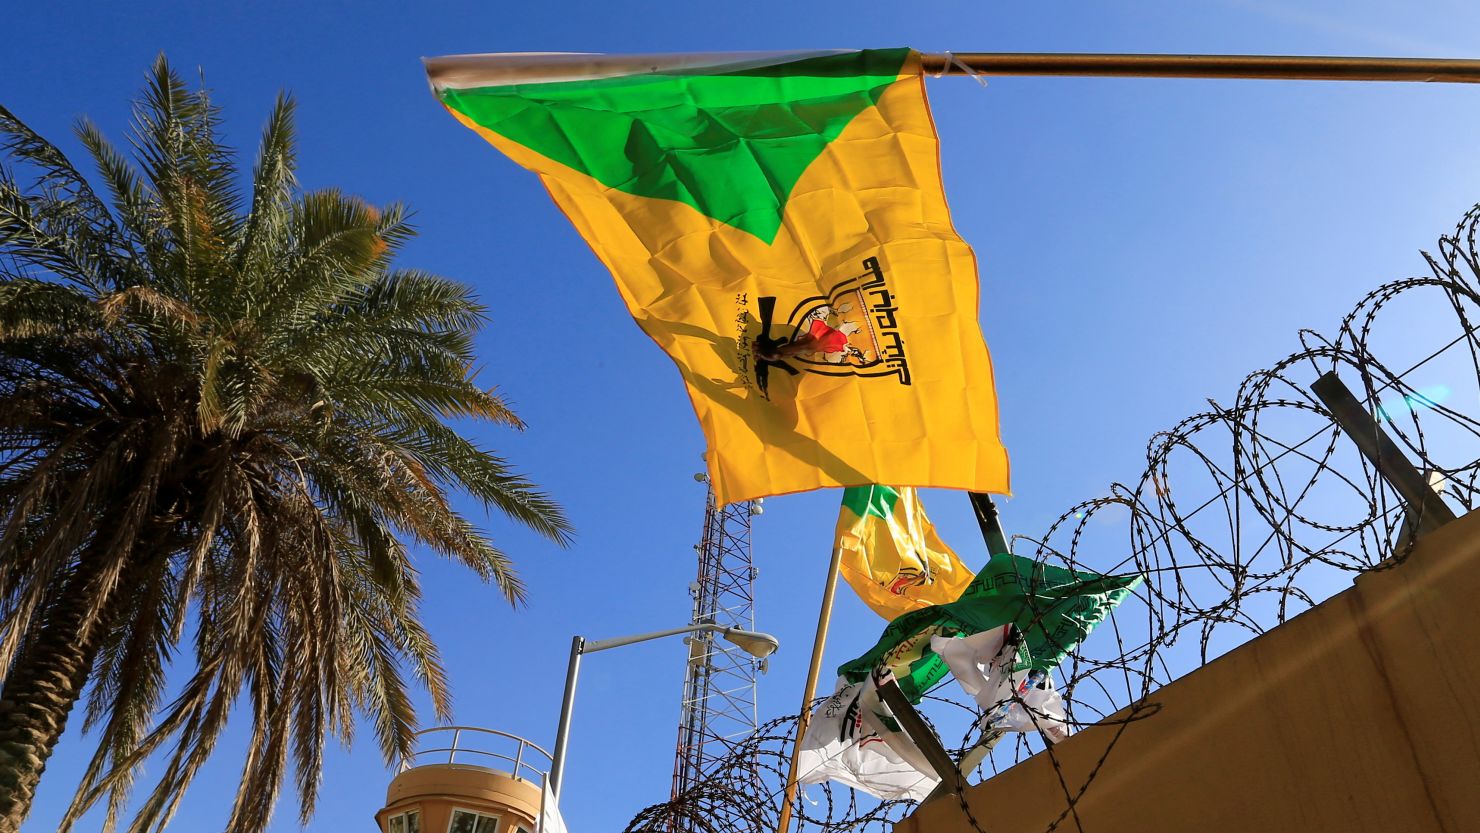 The Kataib Hezbollah militia group's flag flies at a protest outside the US Embassy in Baghdad, Iraq, in 2019.